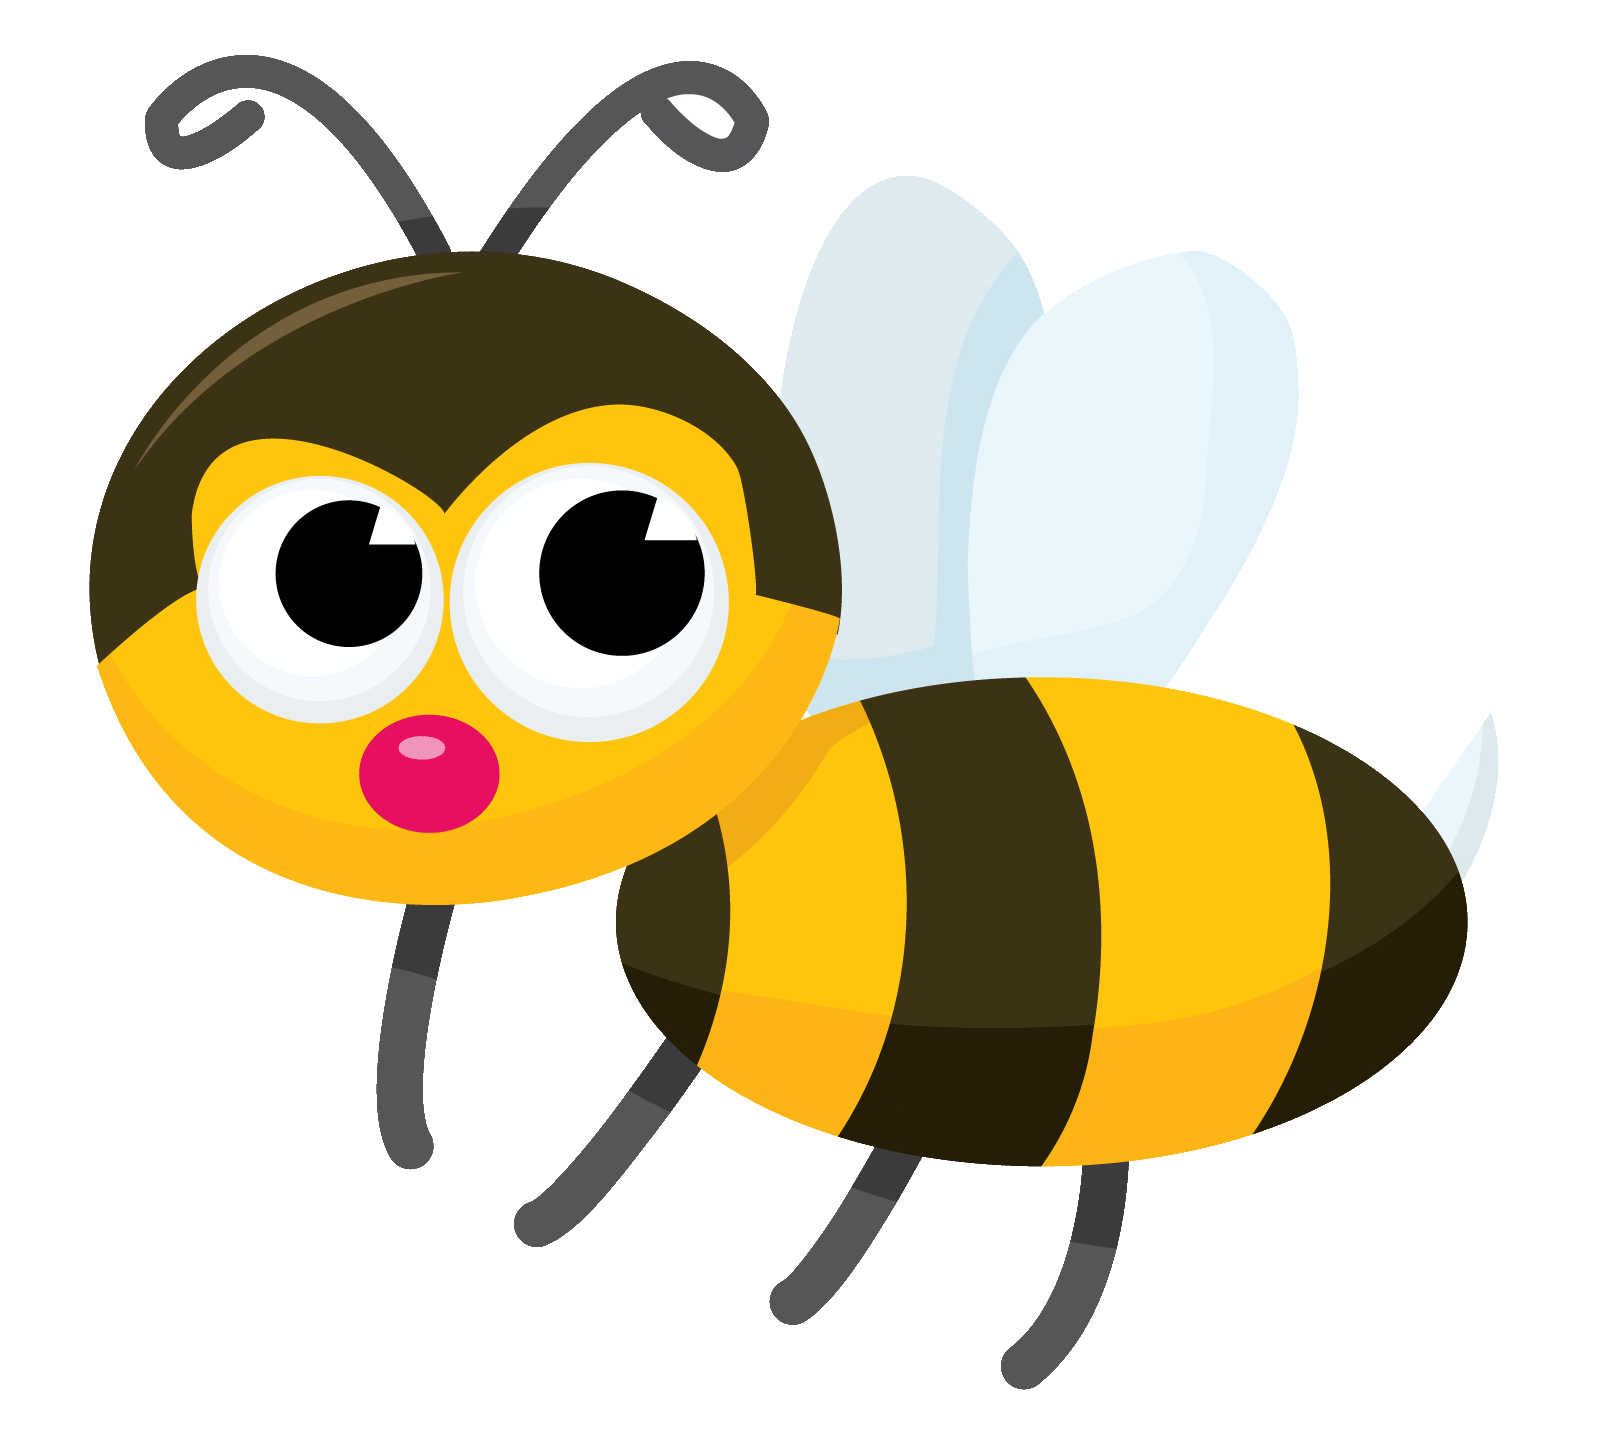 How To Draw A Bumble Bee - ClipArt Best